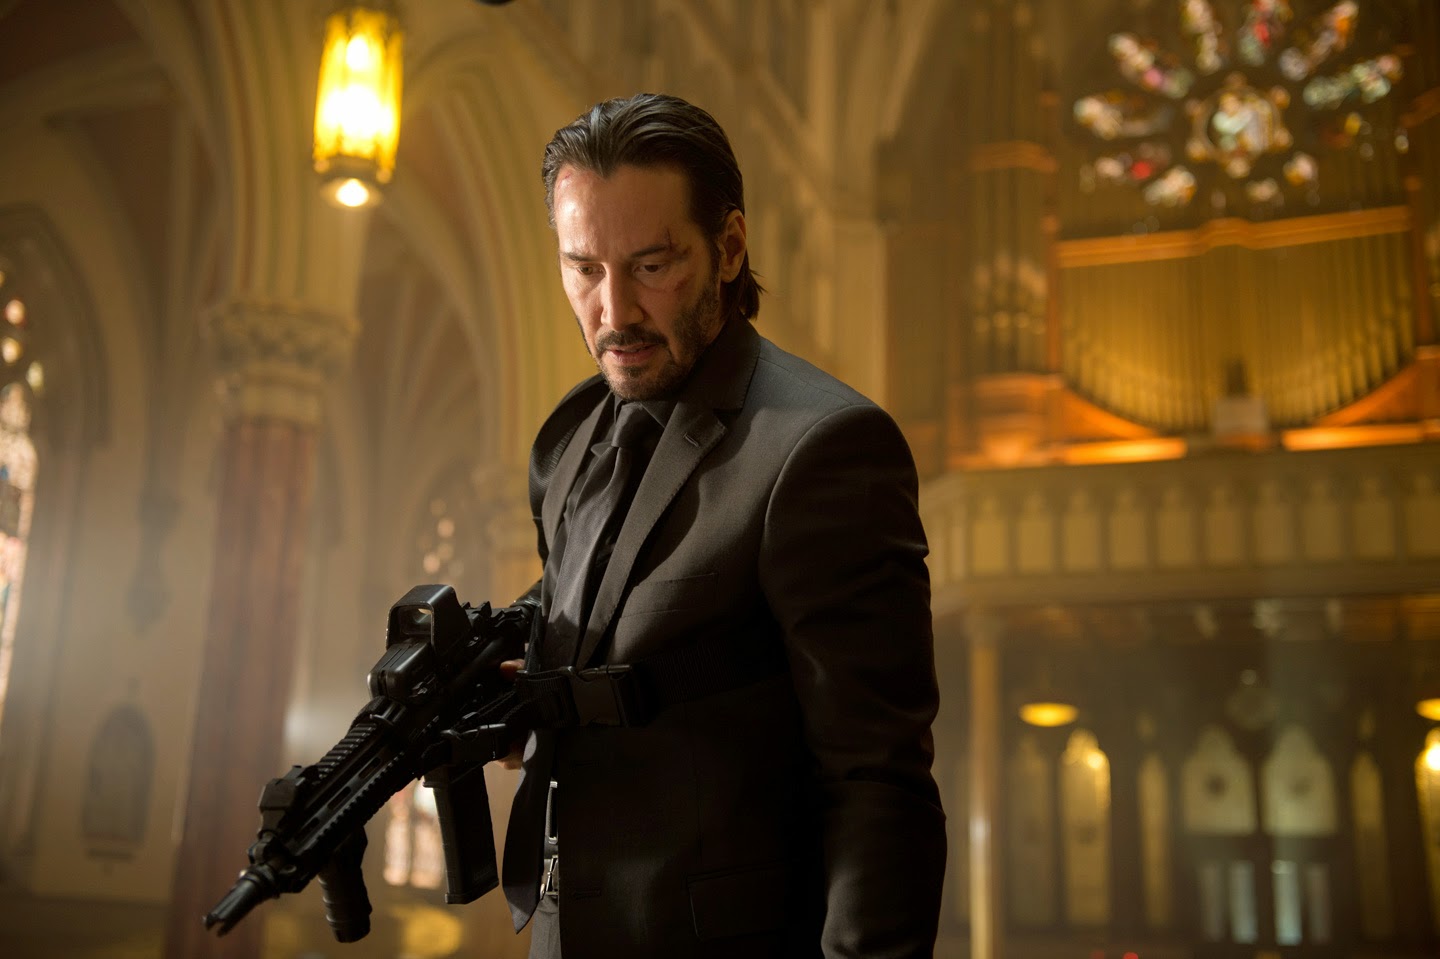 Looking for the best John Wick: Chapter 2 movie trivia? Check out these fun facts about Keanu Reeve’s awesome action flick!